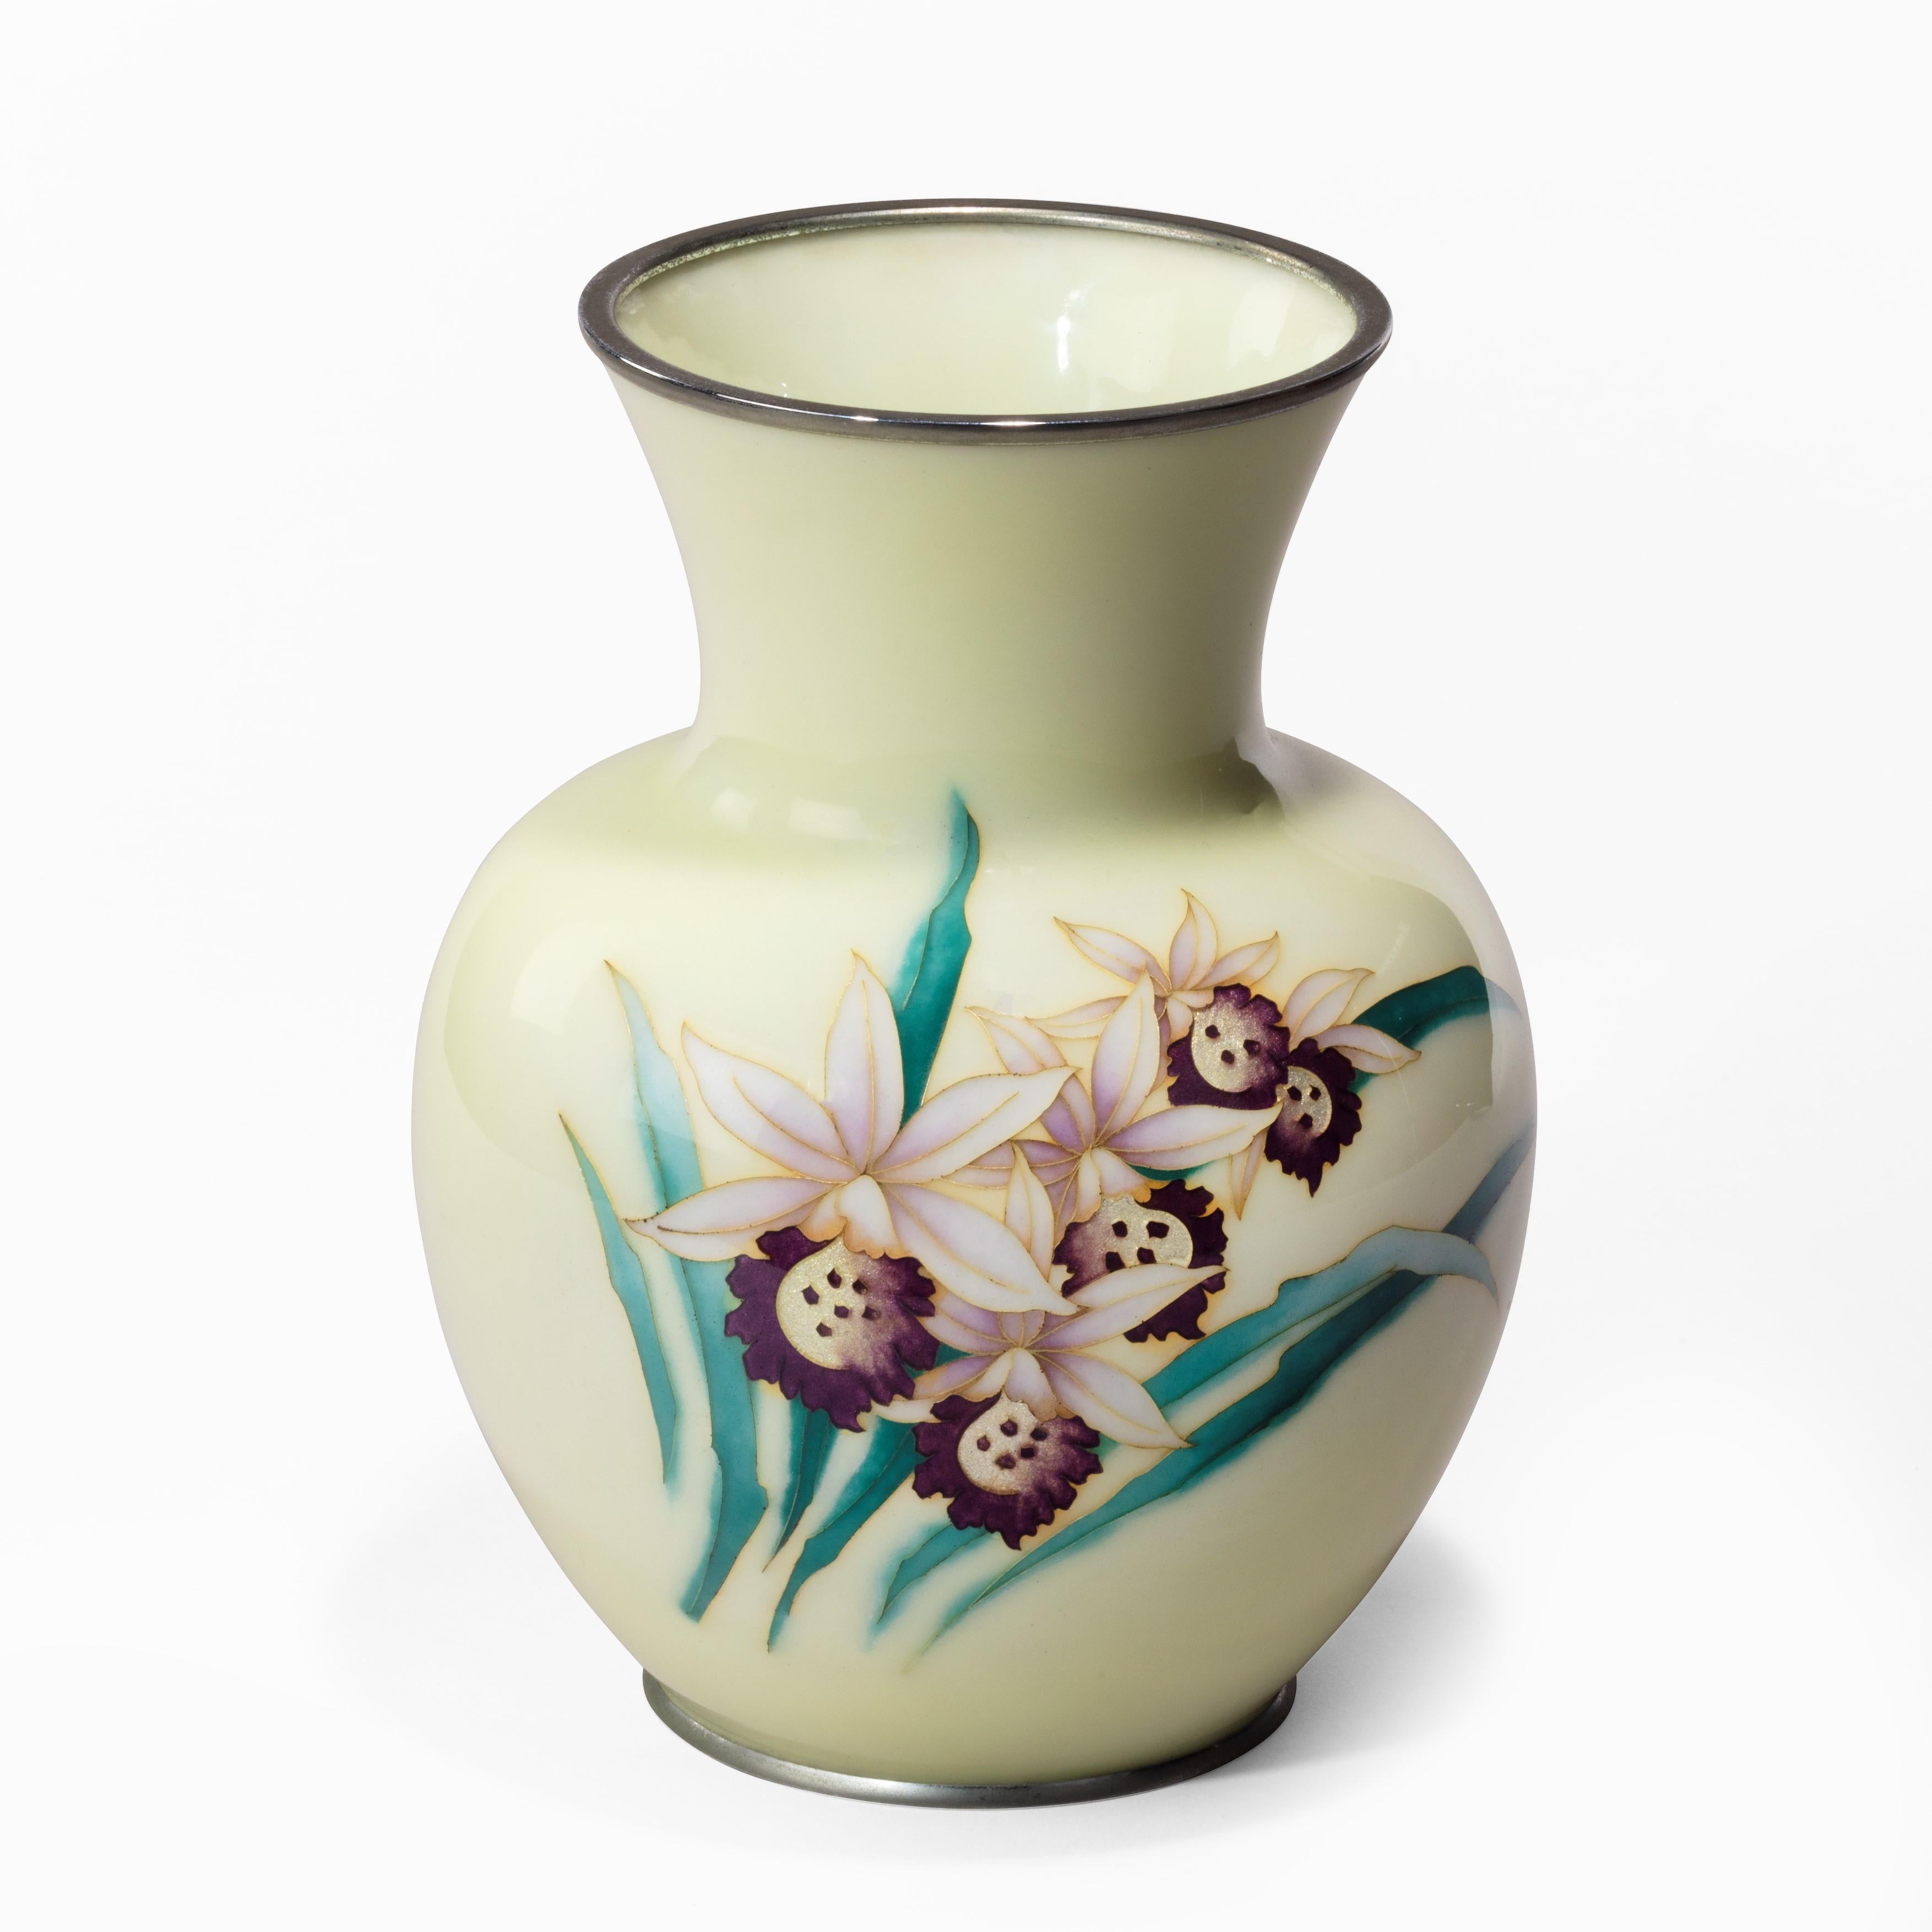 A Showa period pale yellow cloisonné vase by Tamura, decorated with a single spray of five purple and white orchids with silver foil gin-bari centres and inlaid silver wires, the mount stamped ‘Tamura’, Japanese, late 20th century.
  